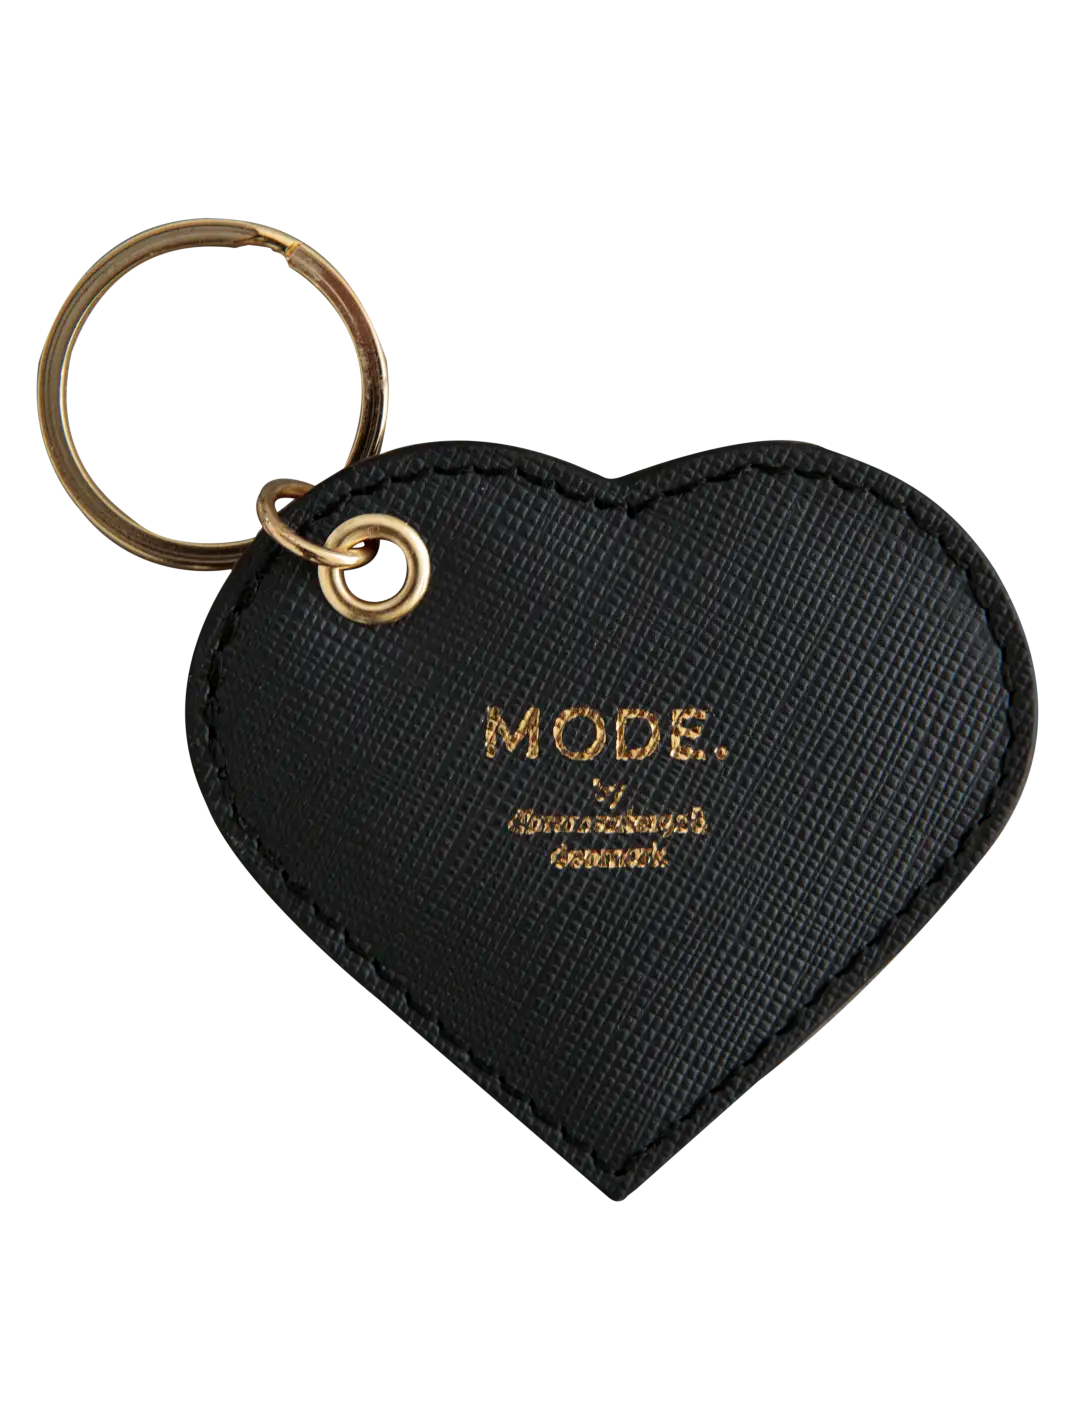 MODE. Heart Key ring - Outlet Night Black